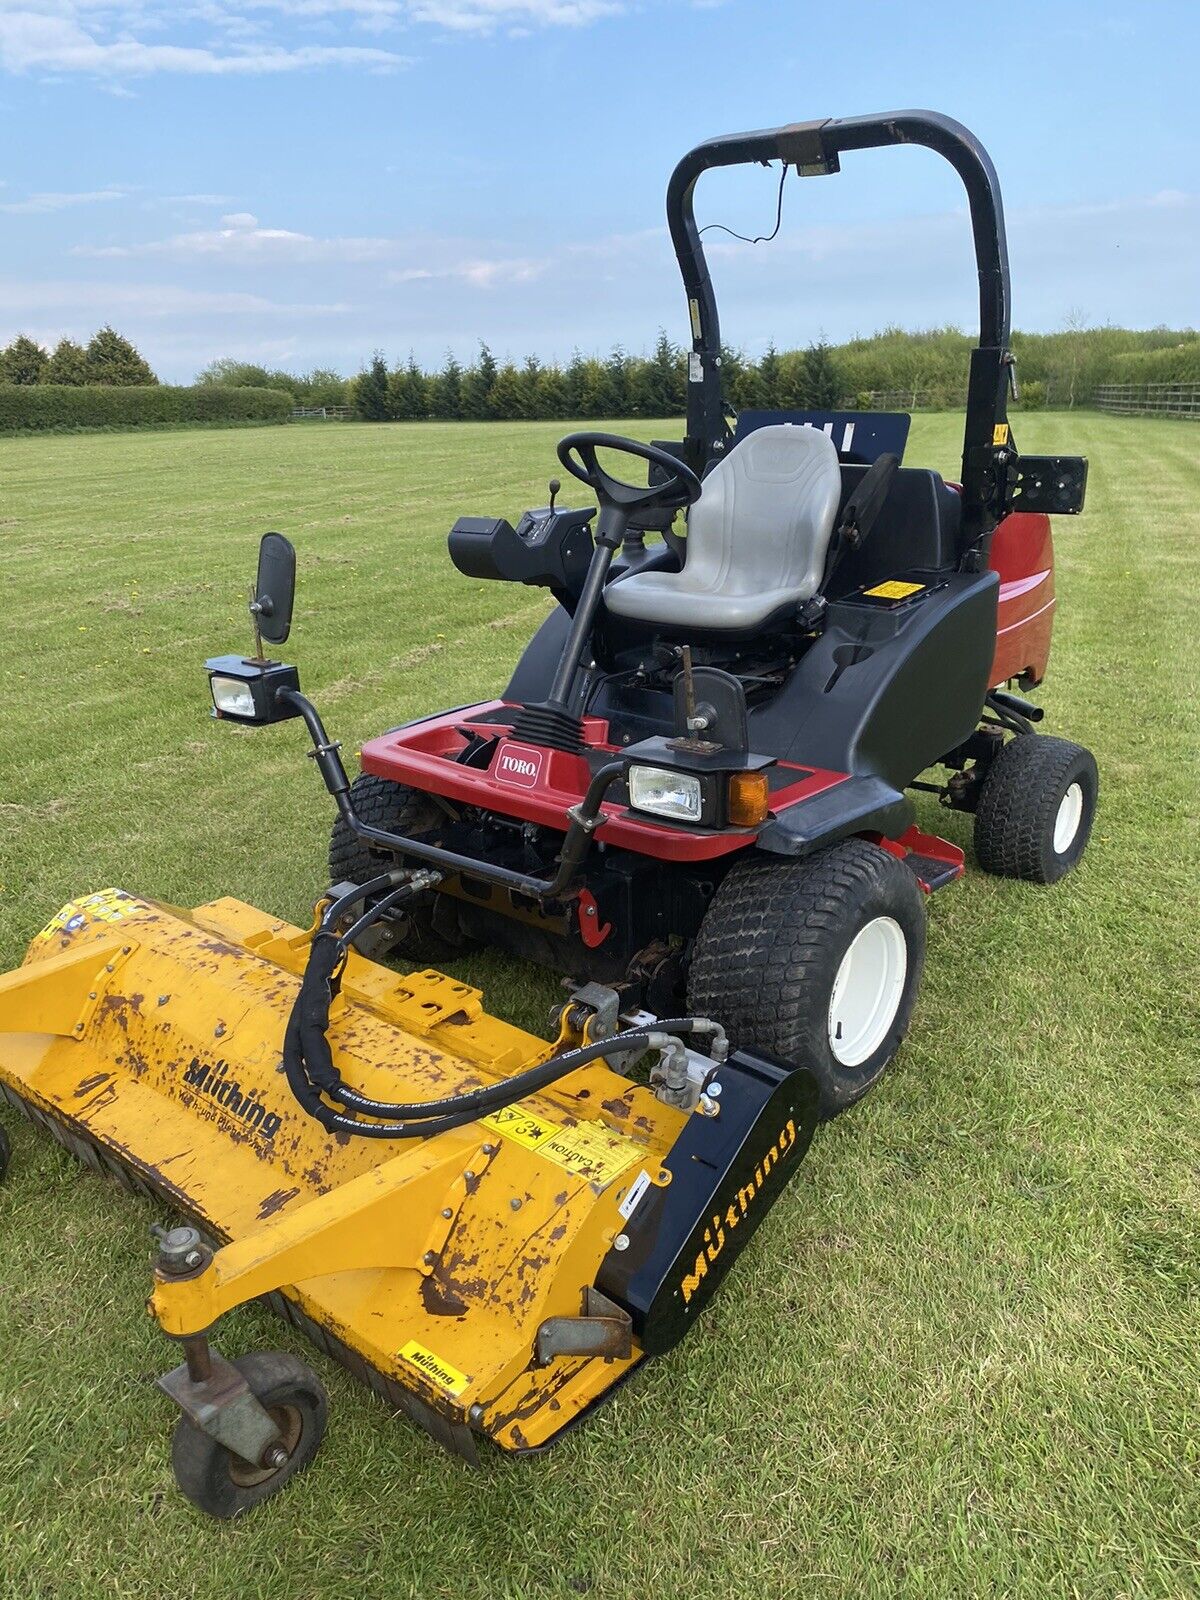 2016 TORO GROUNDMASTER 3400 OUTFRONT RIDE SIT ON MOWER FITTEDWITH MUTHING FLAIL 1